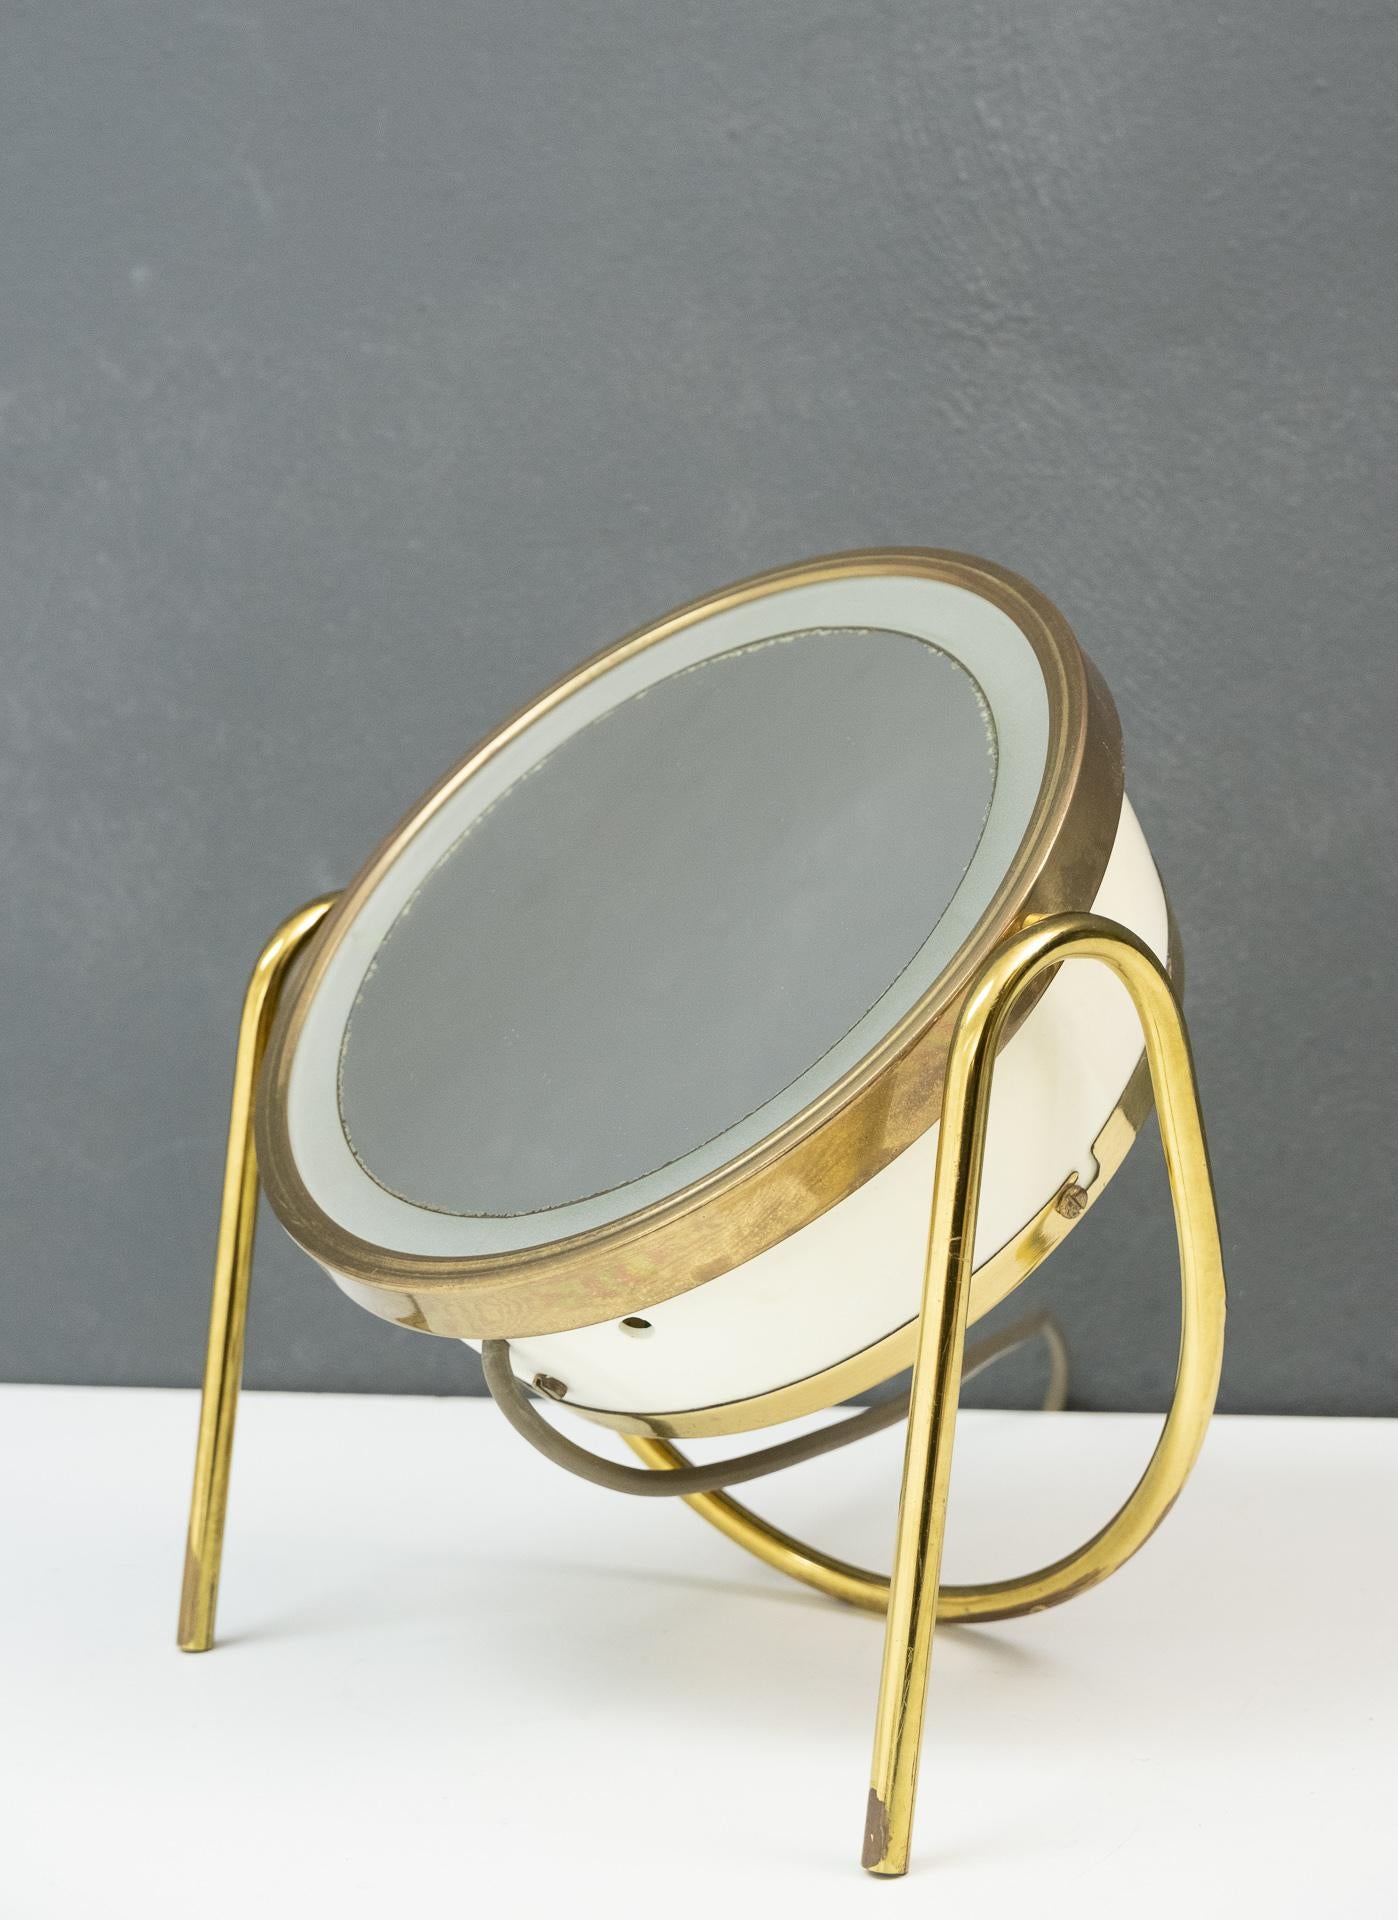 Very nice elegant table vanity shaving mirror. With back lit. Small bulb. Magnified.
Brass and plastic, 1970s, France. Good working condition.